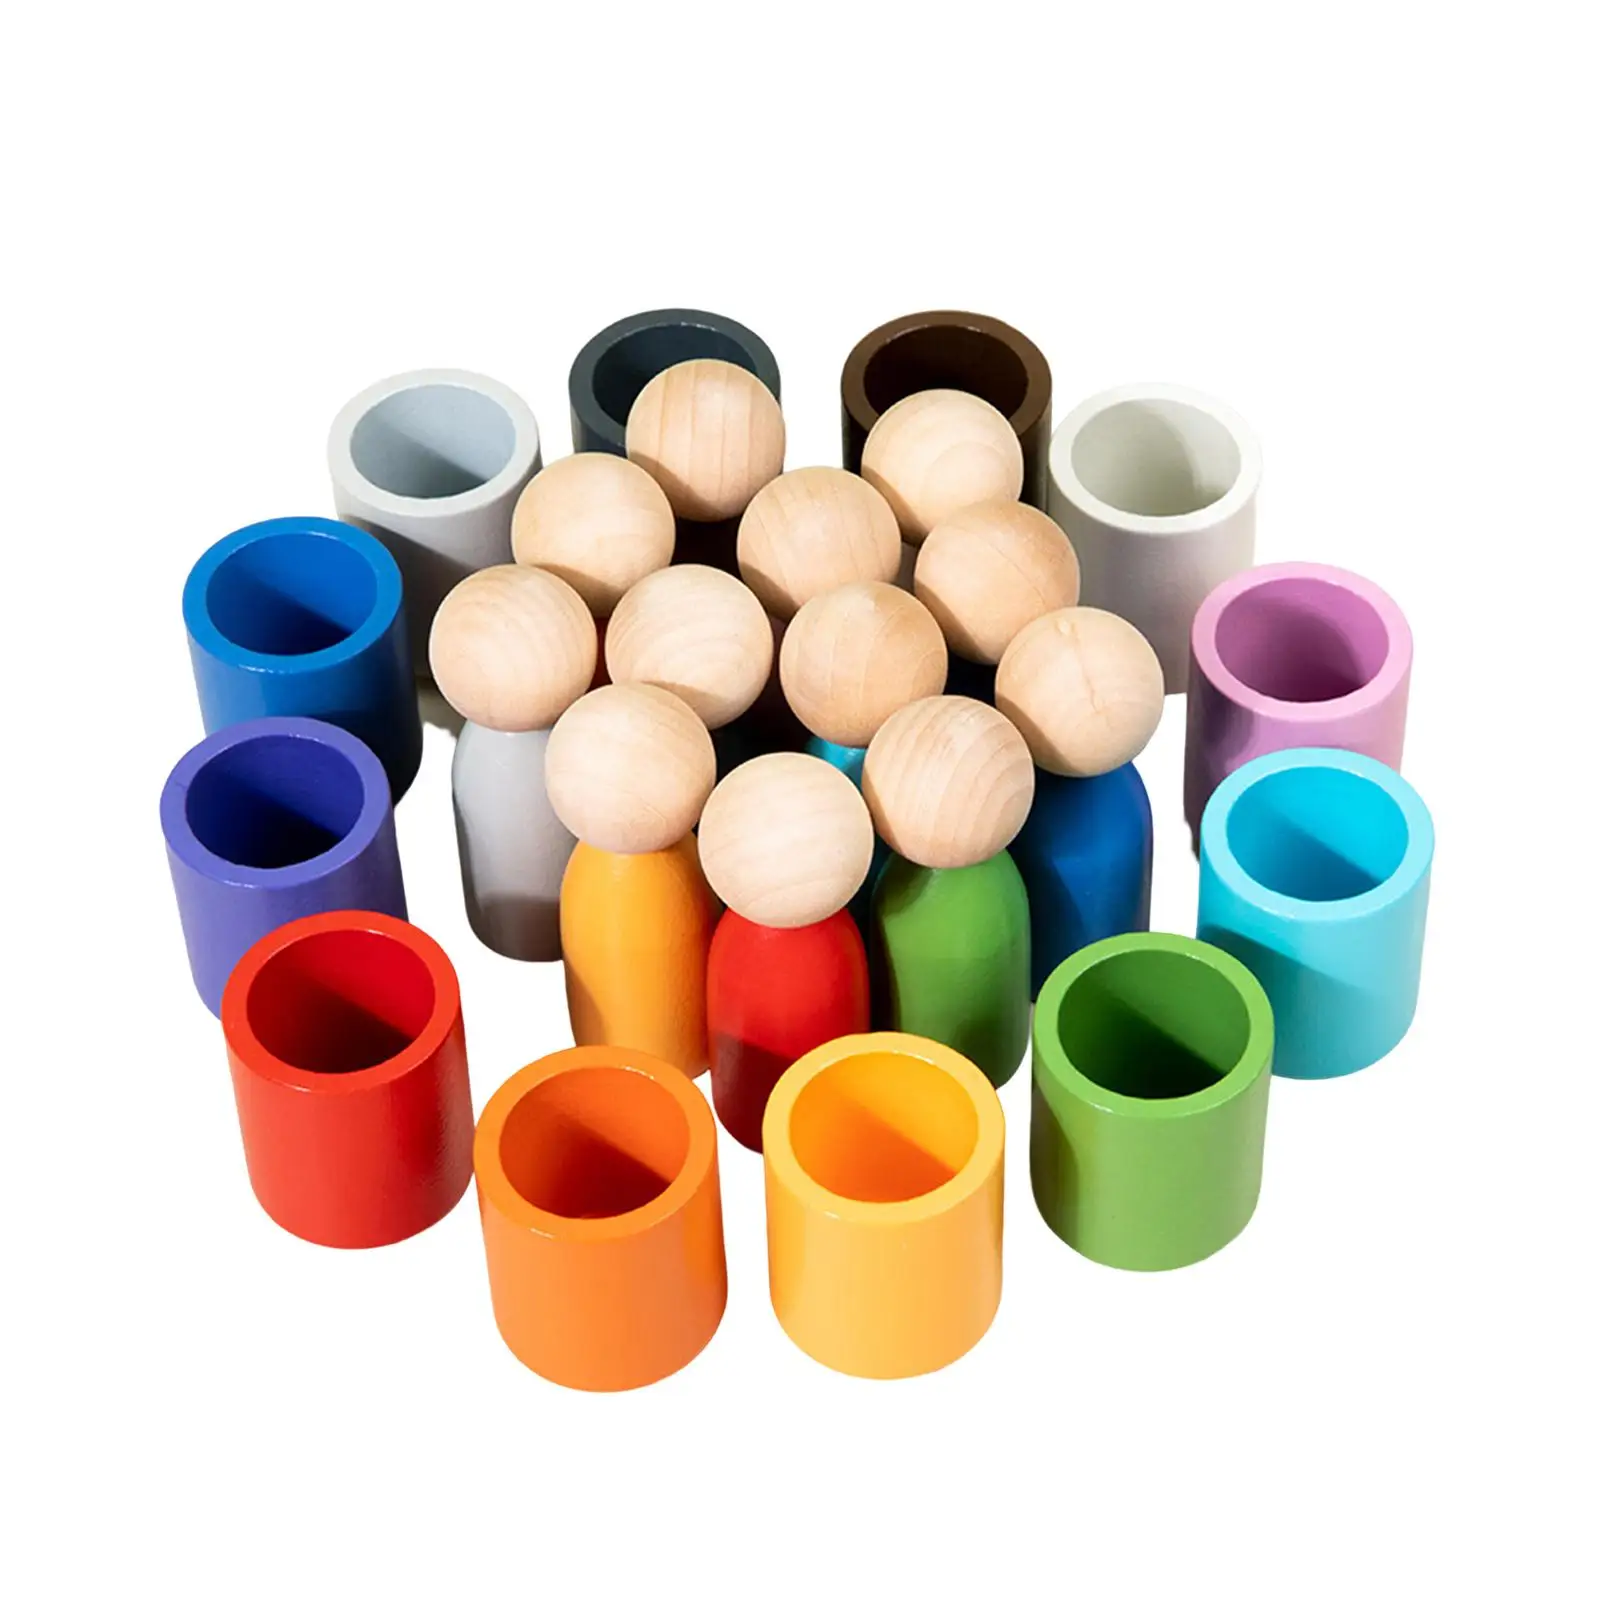 Balls in Cups Montessori Toy Matching and Counting Toy Sensory Toys Wooden Peg Dolls in Cups for Girls Toddlers Boys Children